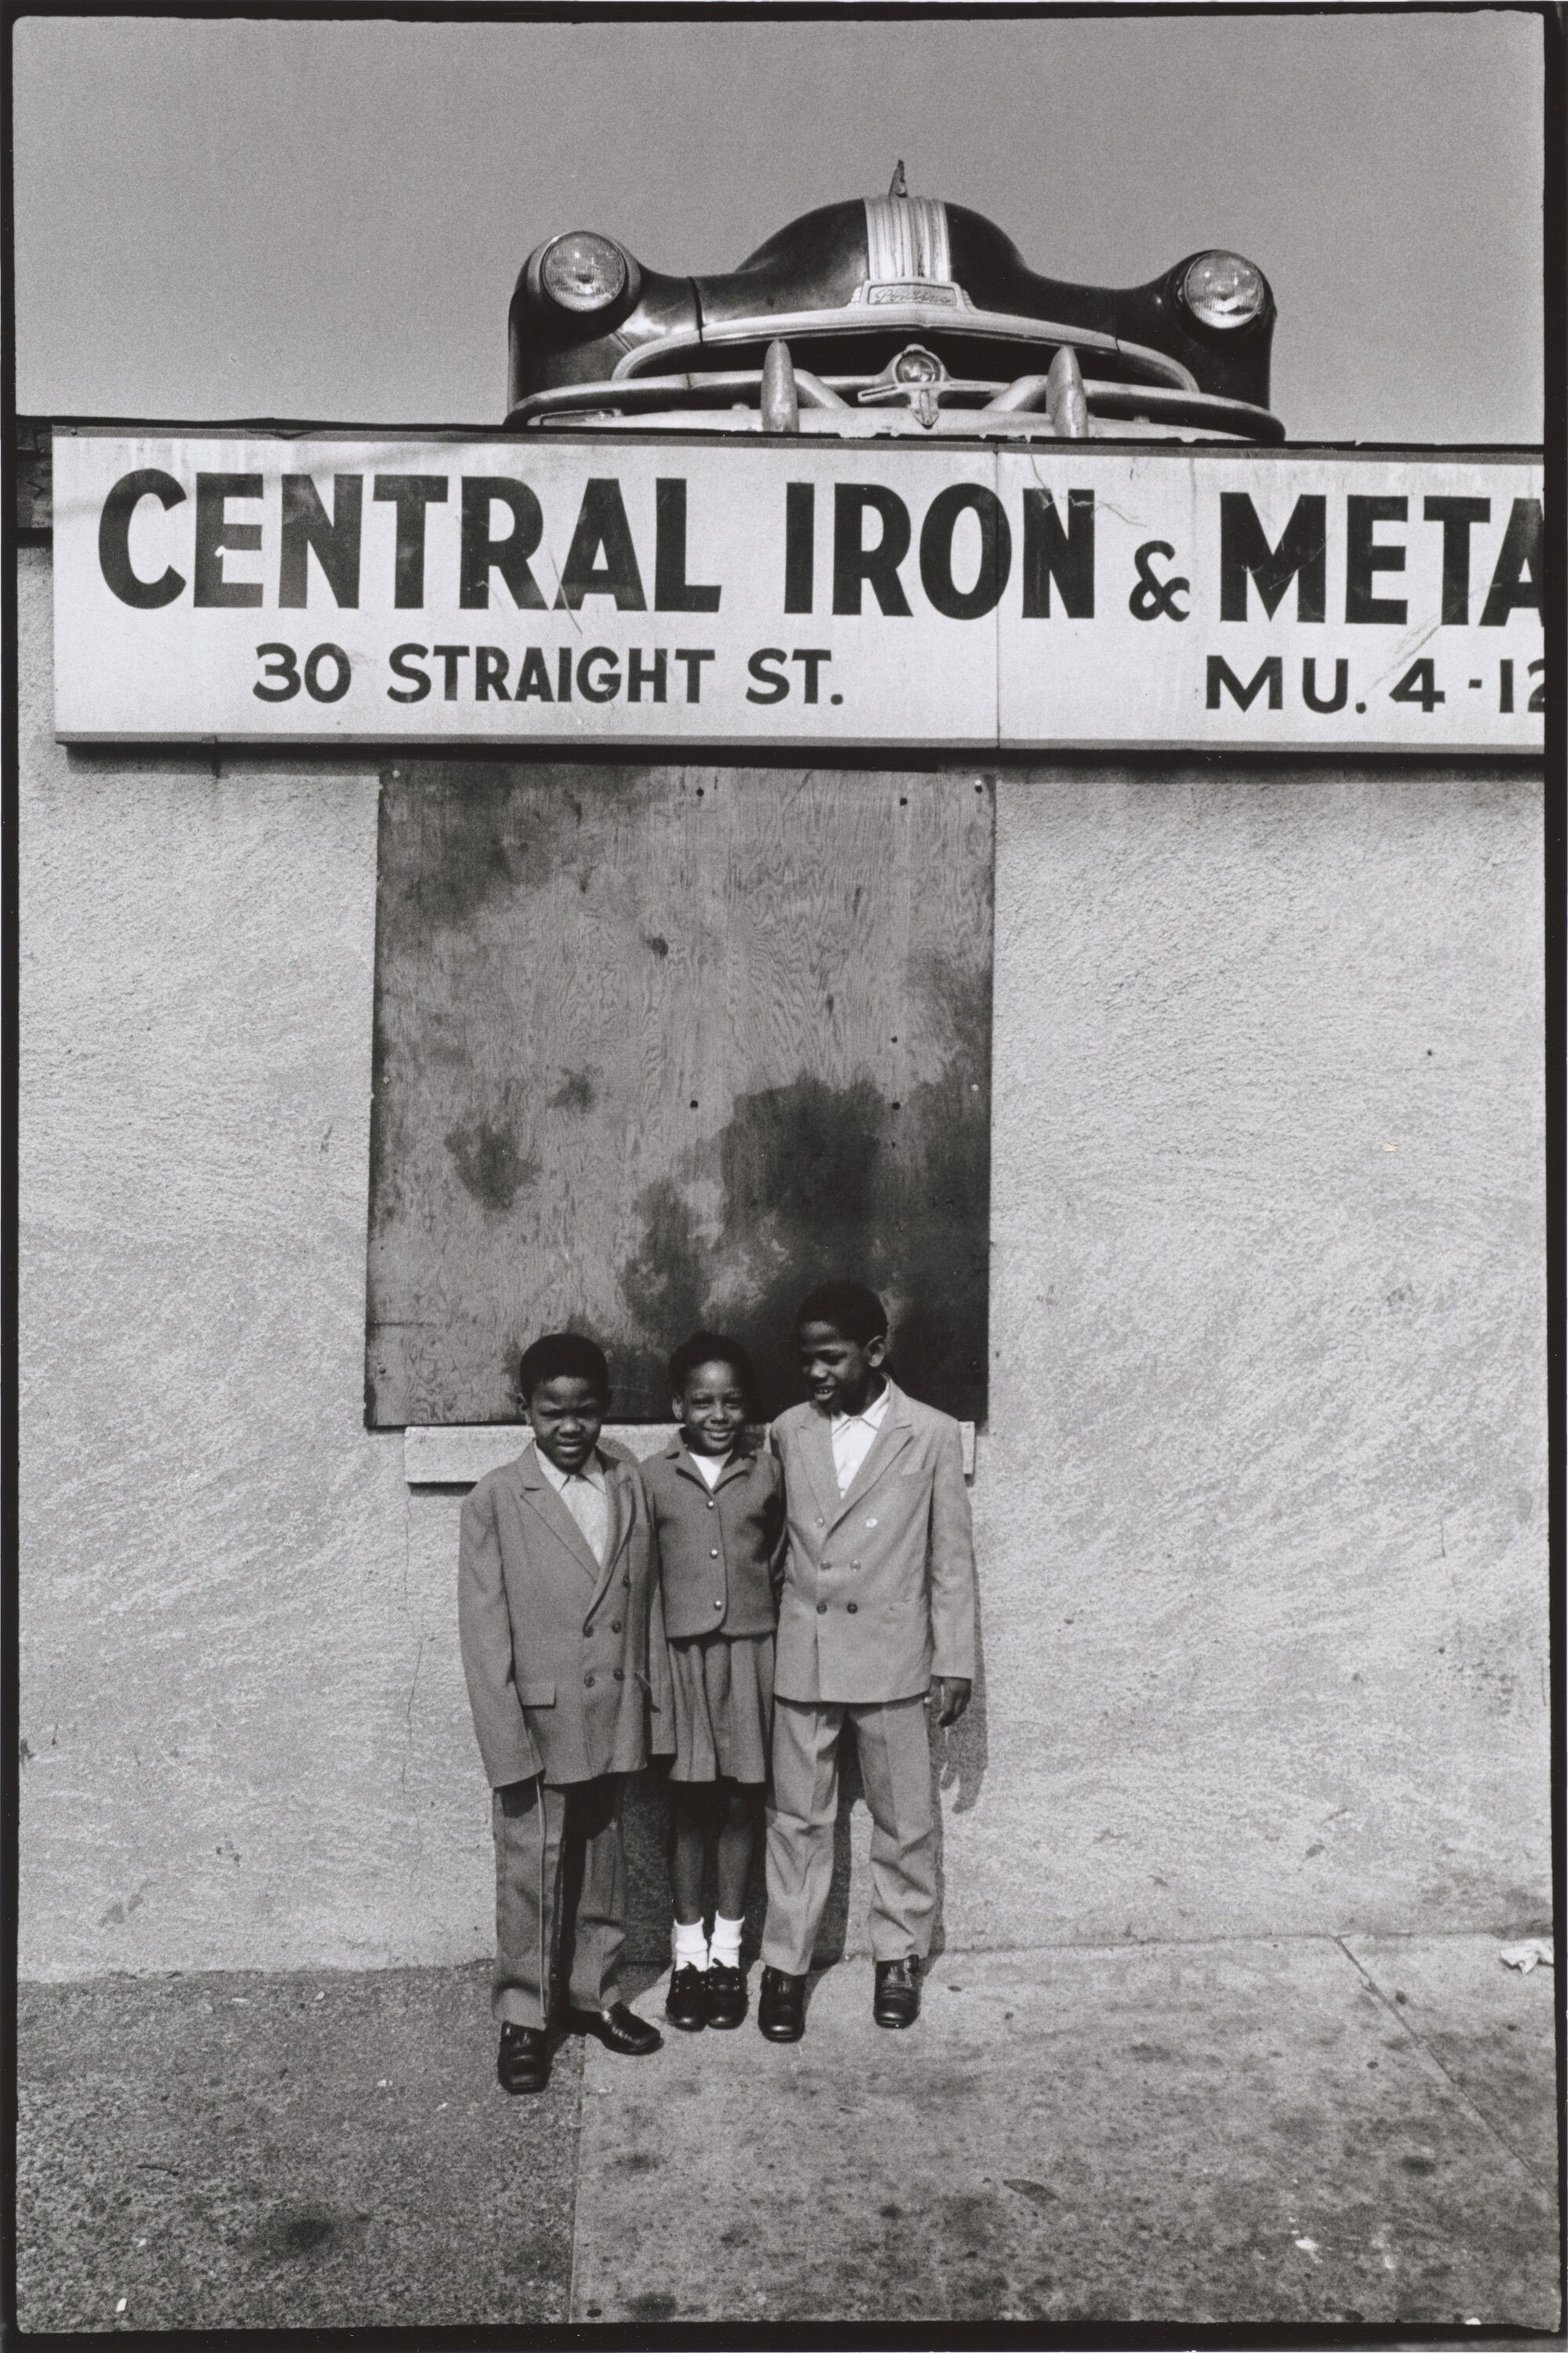 Three children standing together in front of a sign for a metal shop.